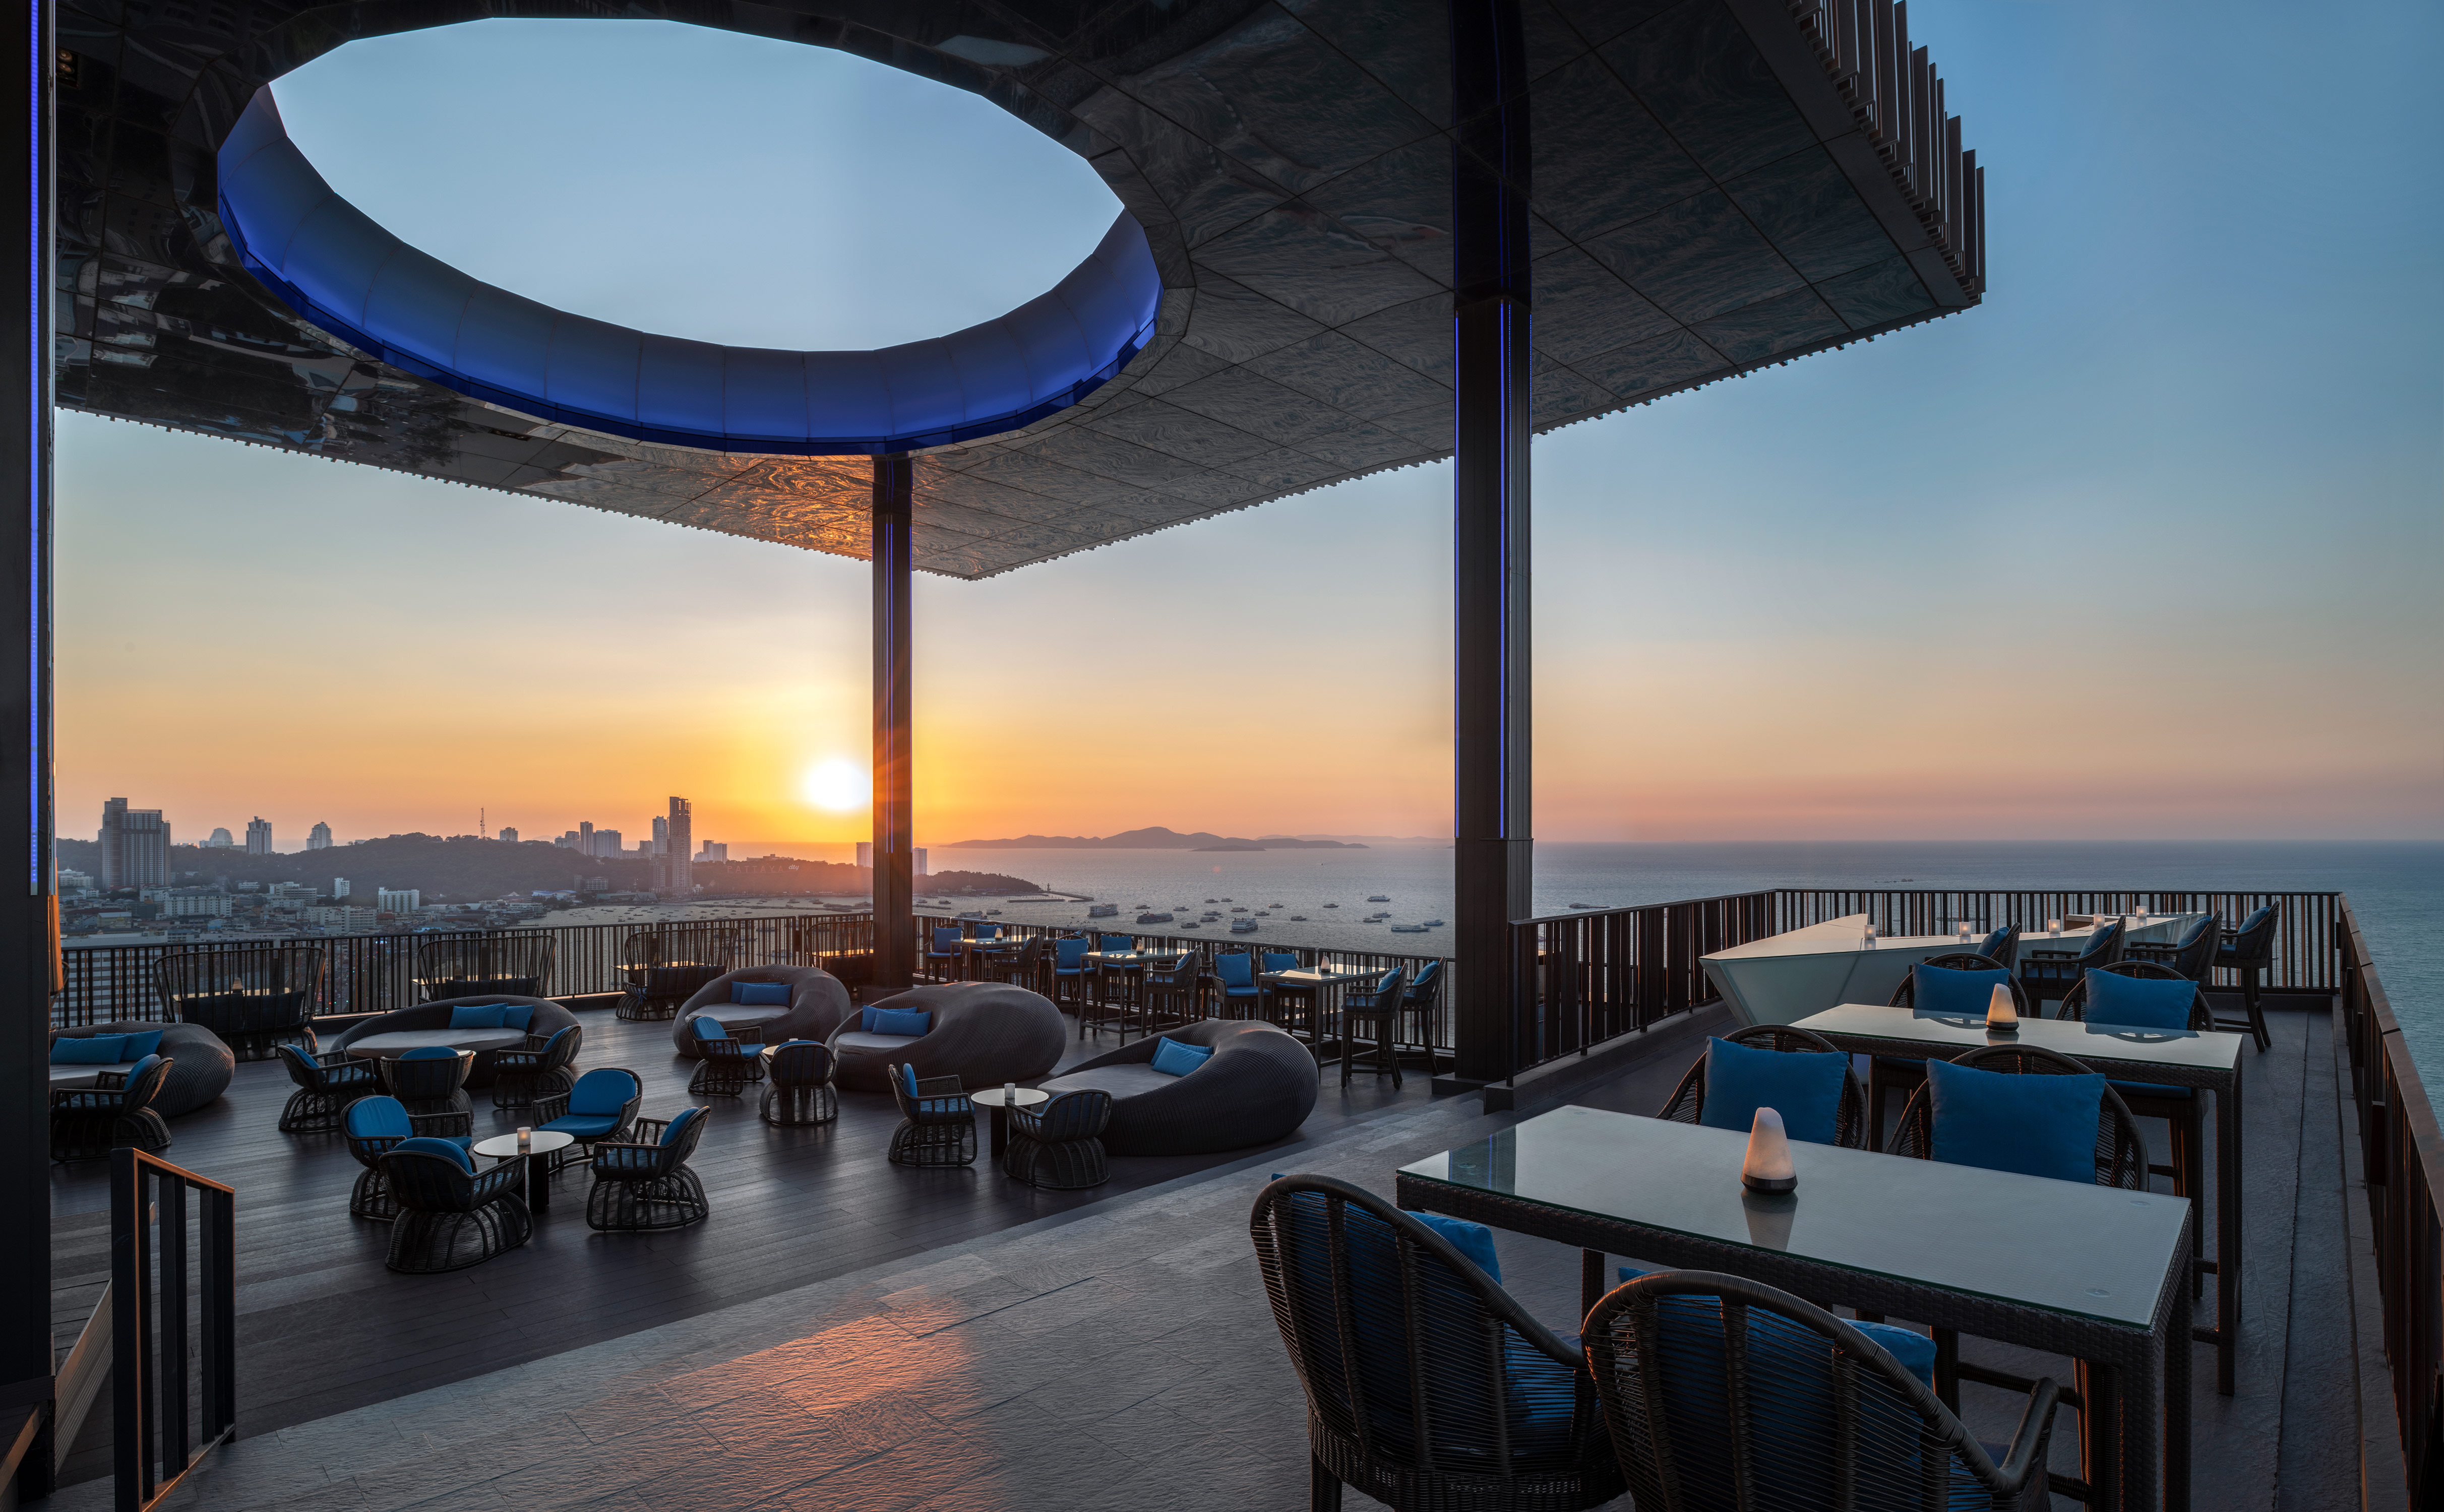 Terrace of Horizon Rooftop Bar with City View at Sunset